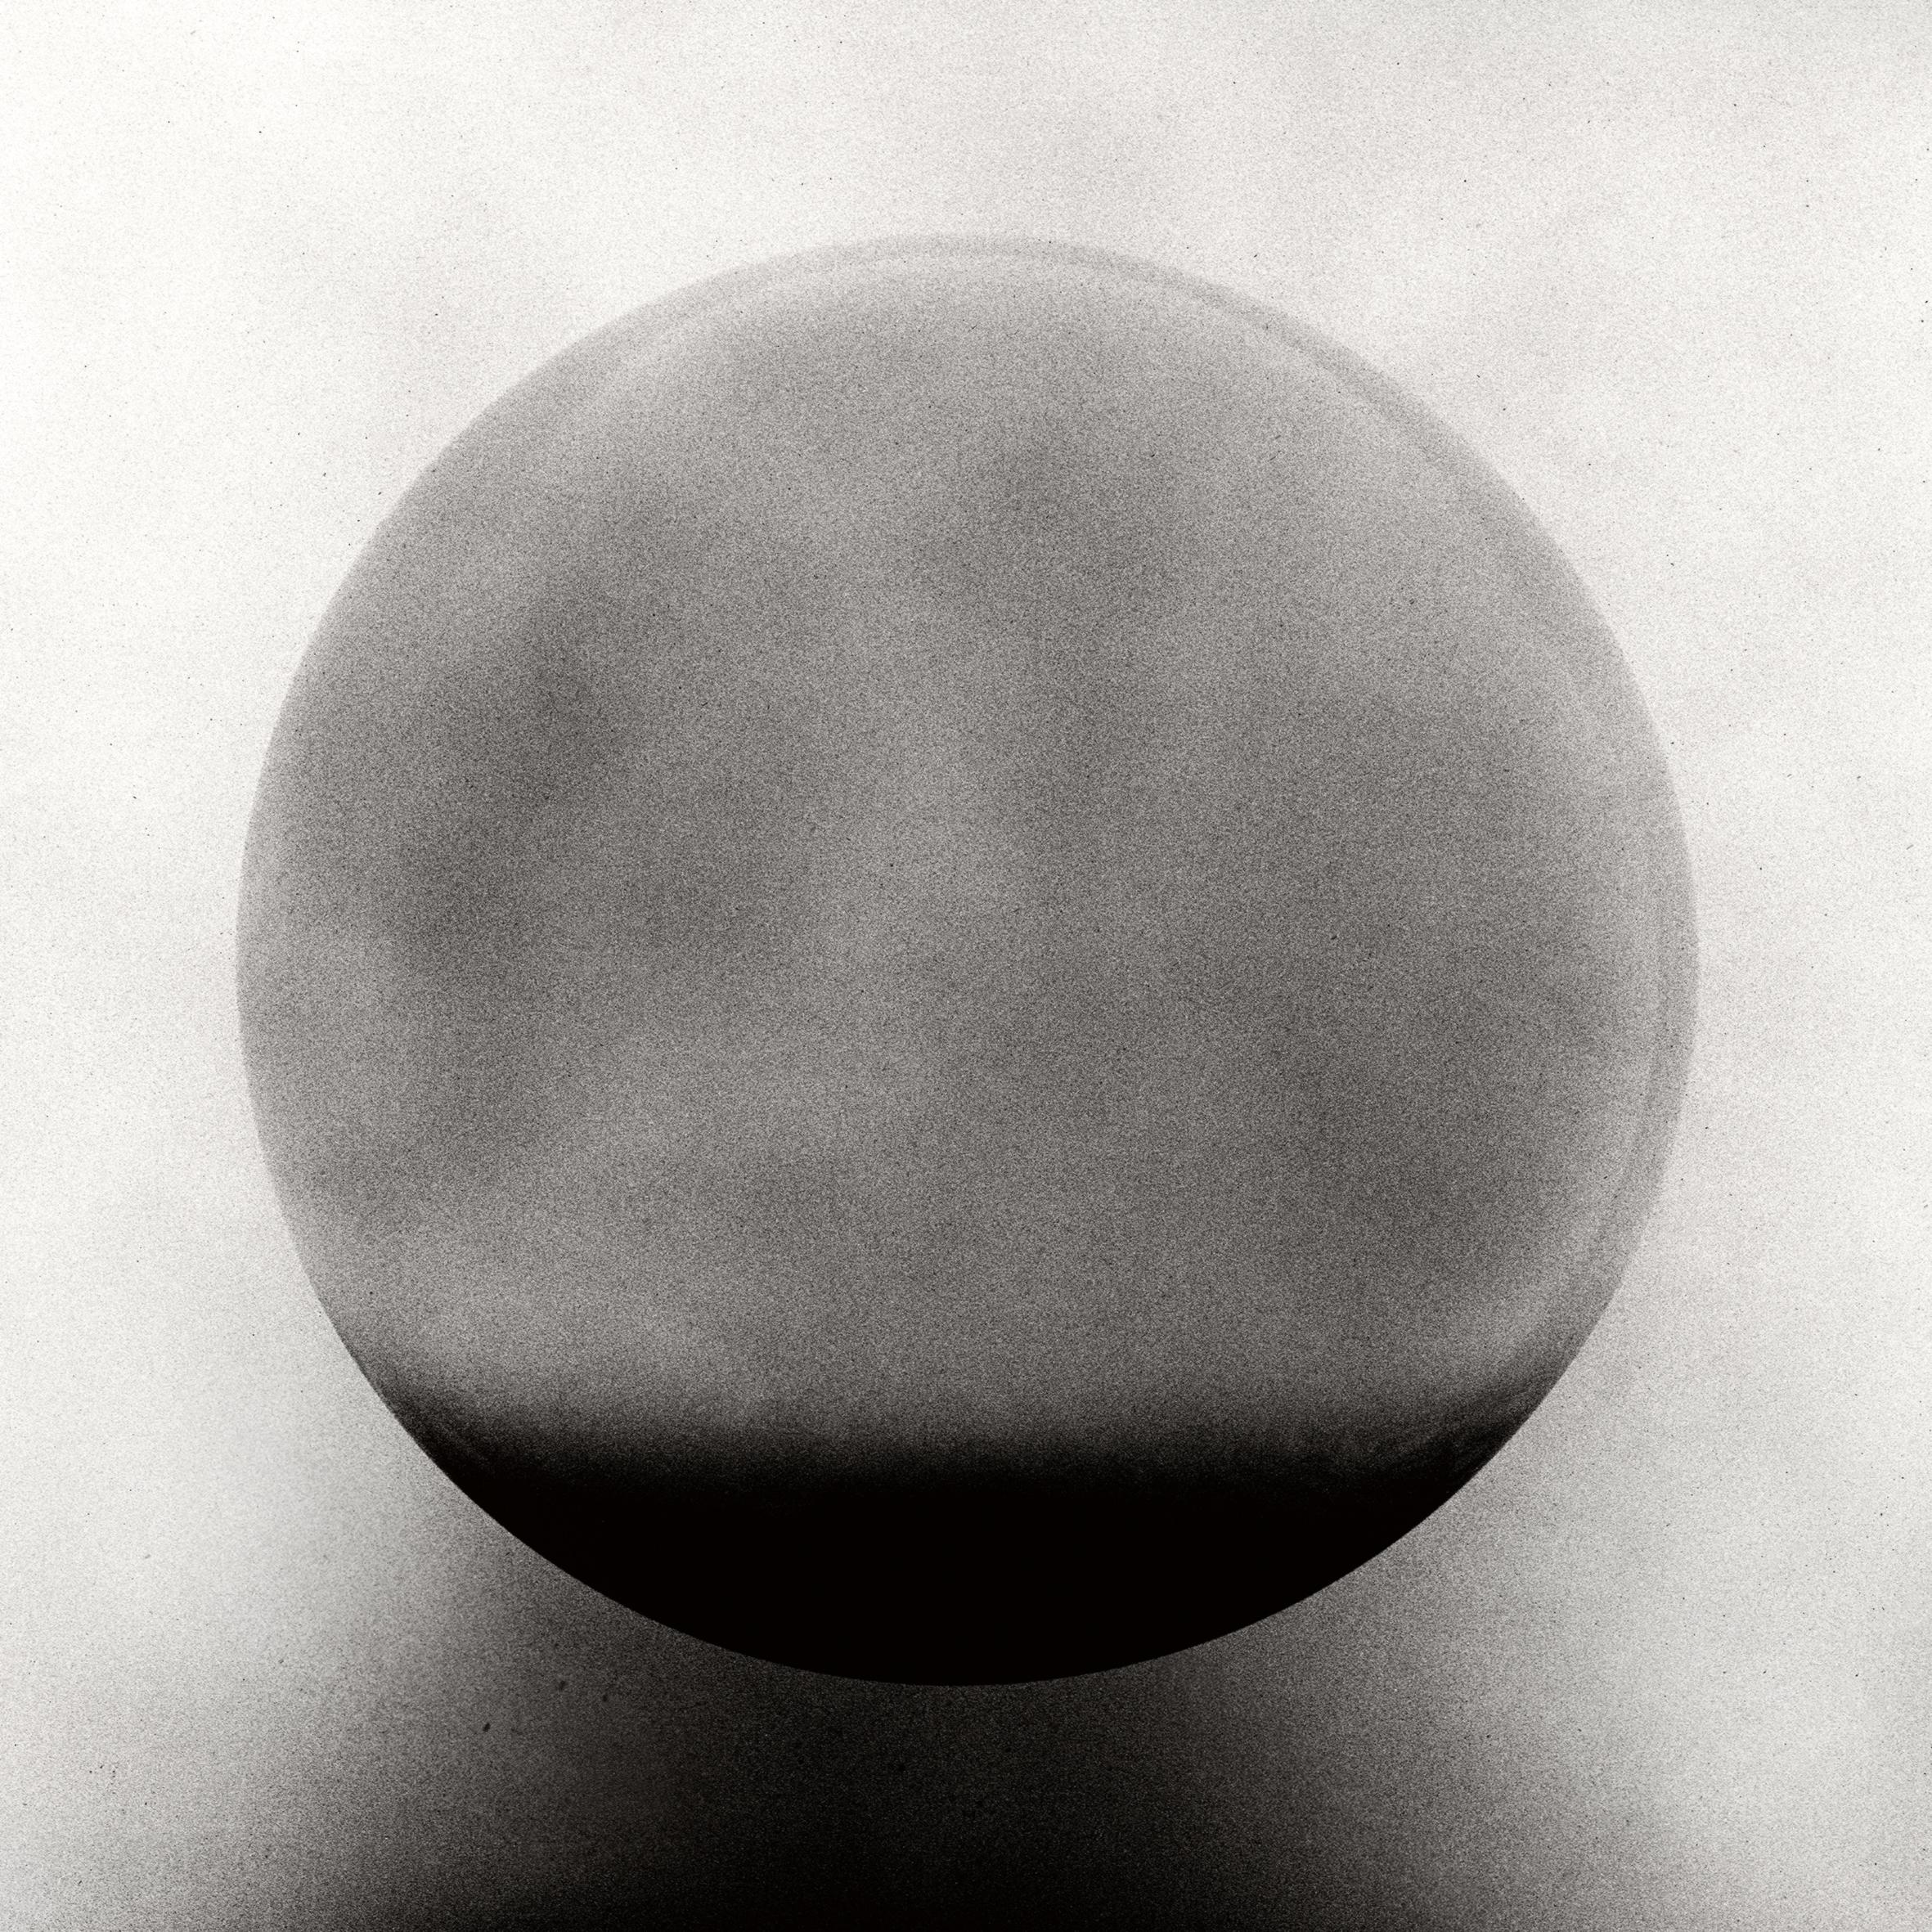 Sphere - Black and white still life film photography, Limited edition of 10